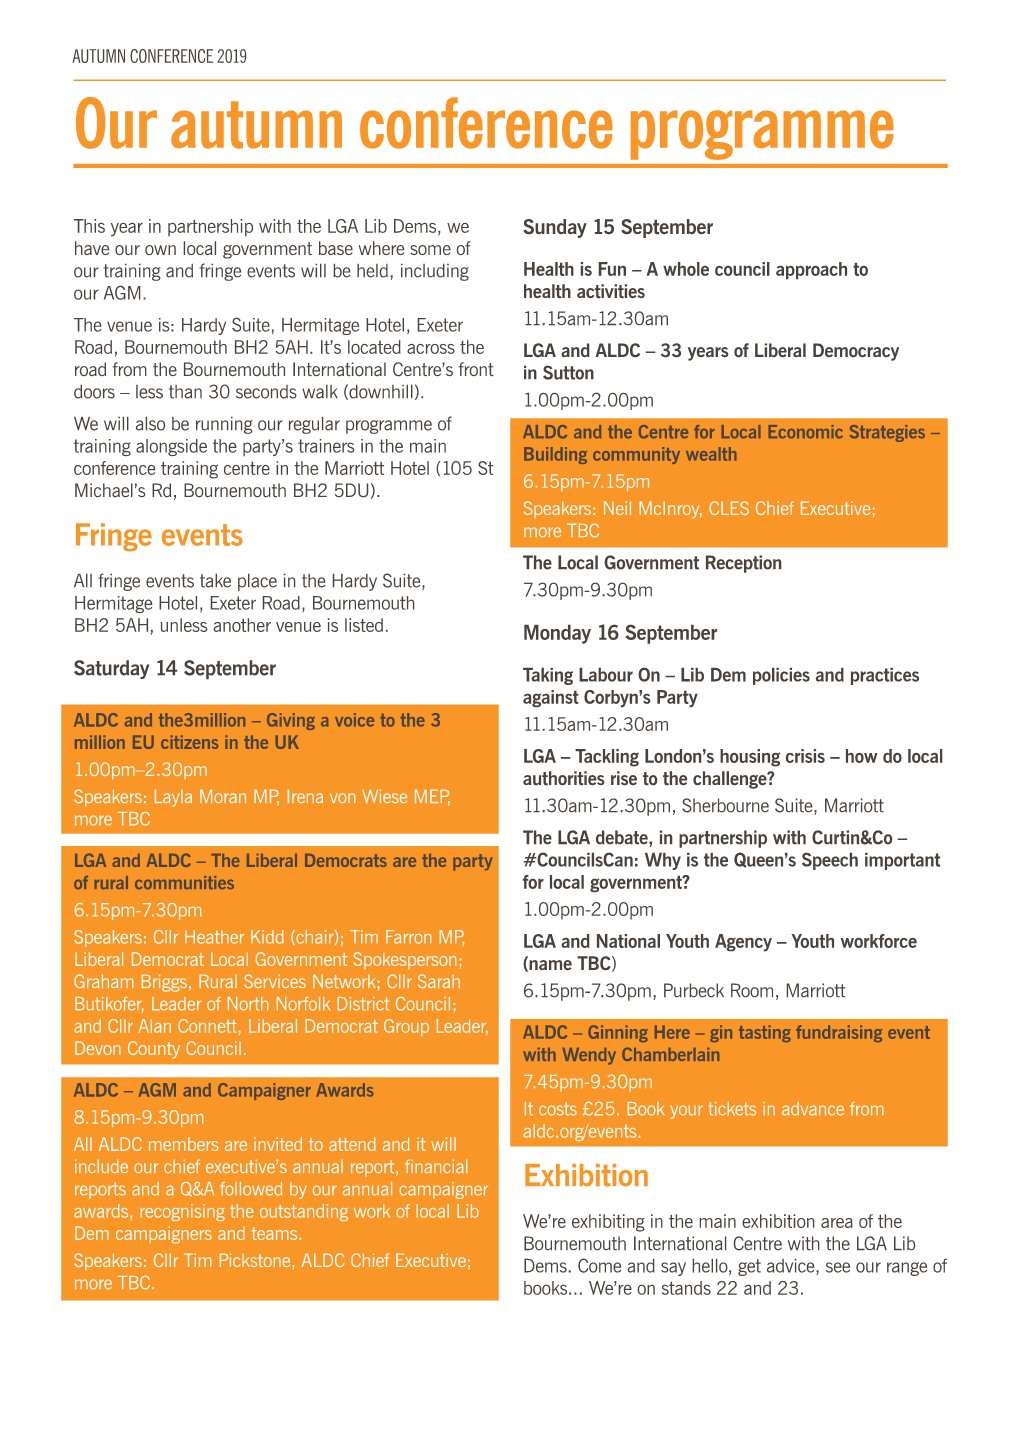 Our Autumn Conference Programme